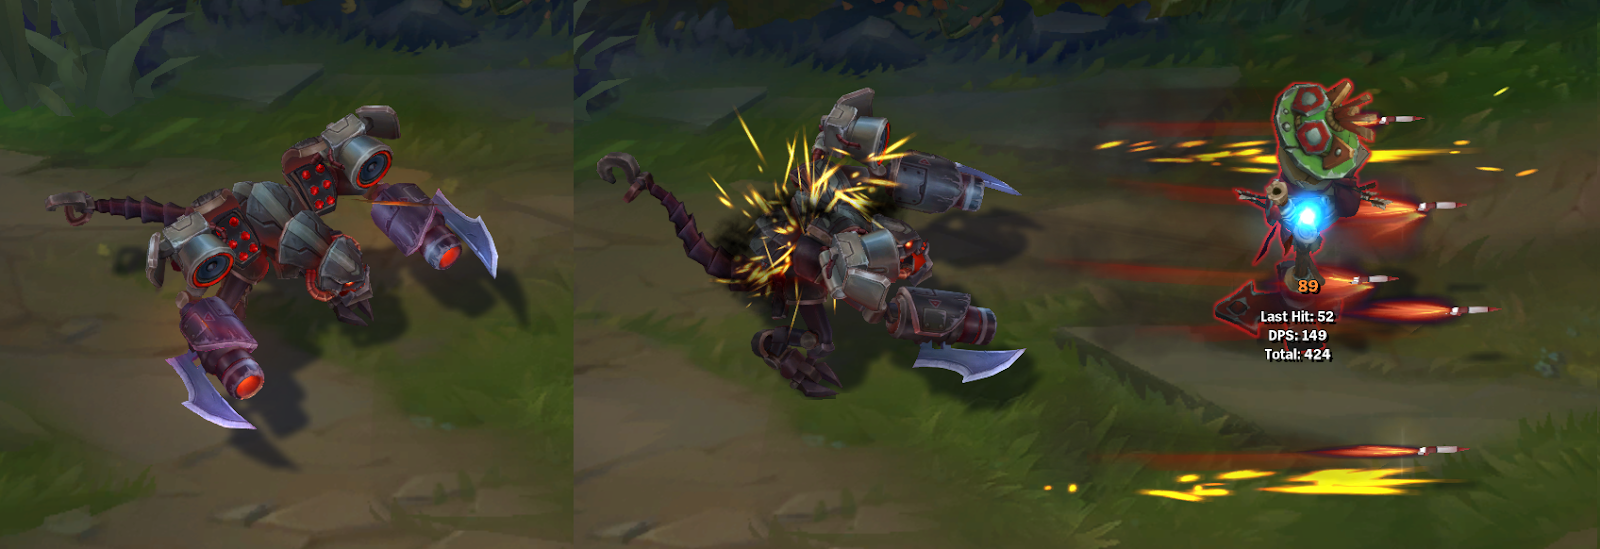 4/16 PBE Update: FPX Chroma Assets, TFT Arenas, & More : r/leagueoflegends